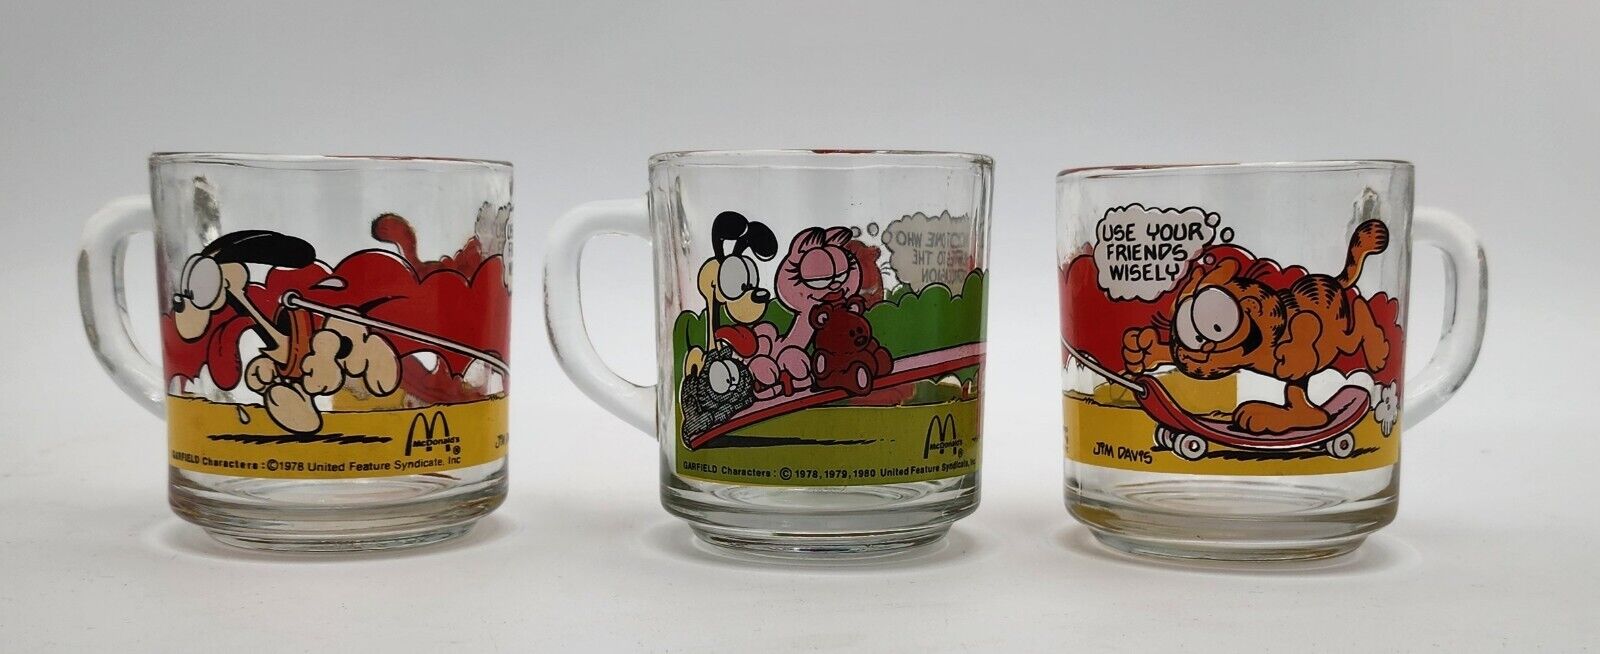 Garfield Glass Mug Cups made in USA 1978 from McDonalds Vintage Set of 3 Anchor